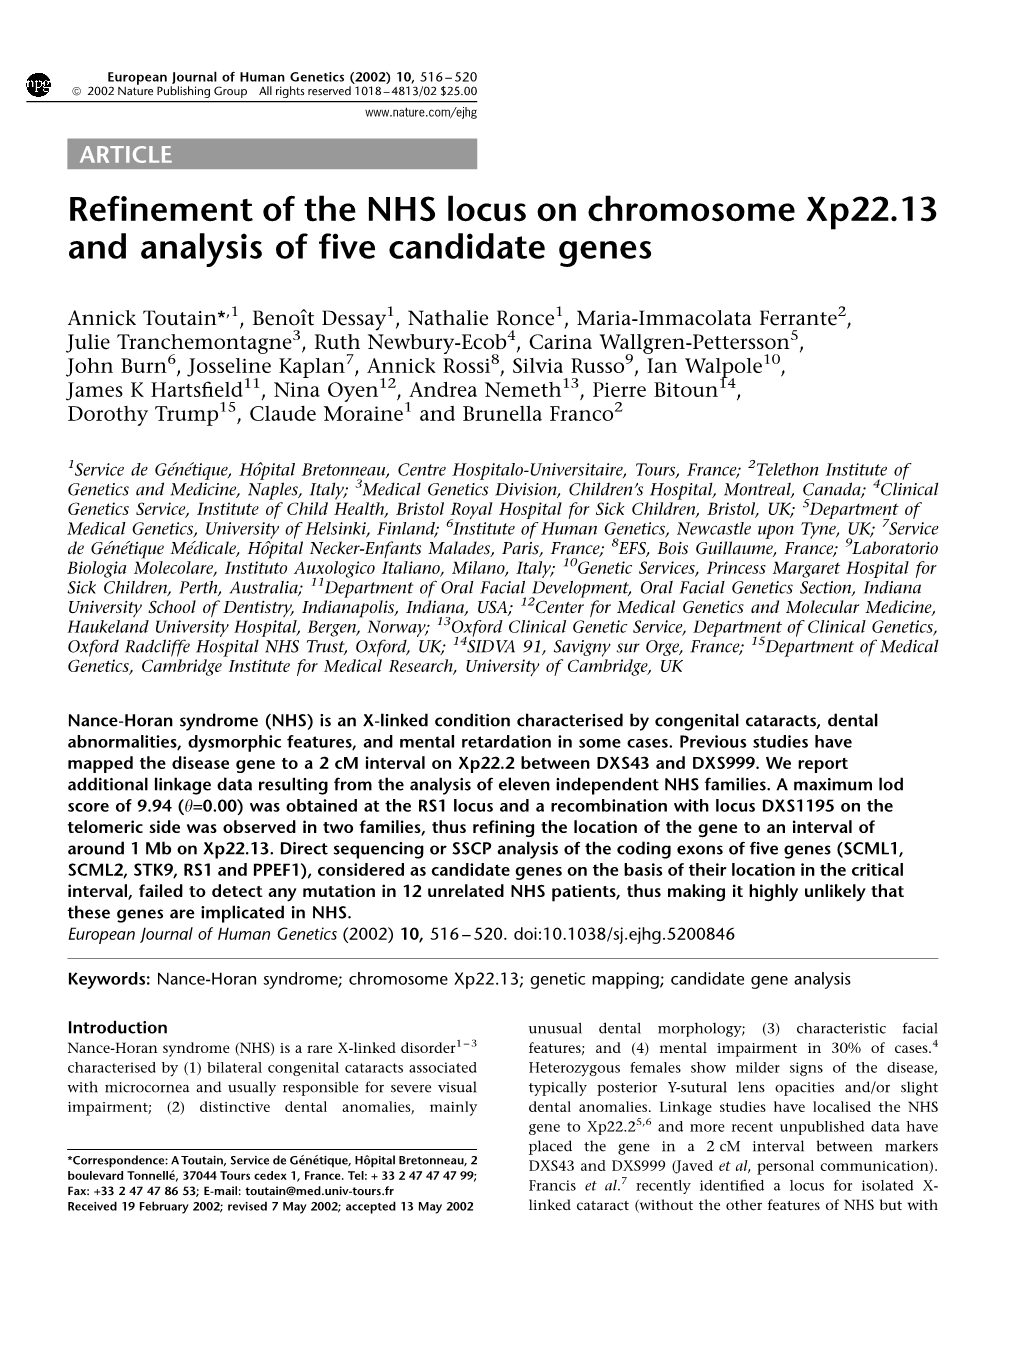 Refinement of the NHS Locus on Chromosome Xp22.13 and Analysis